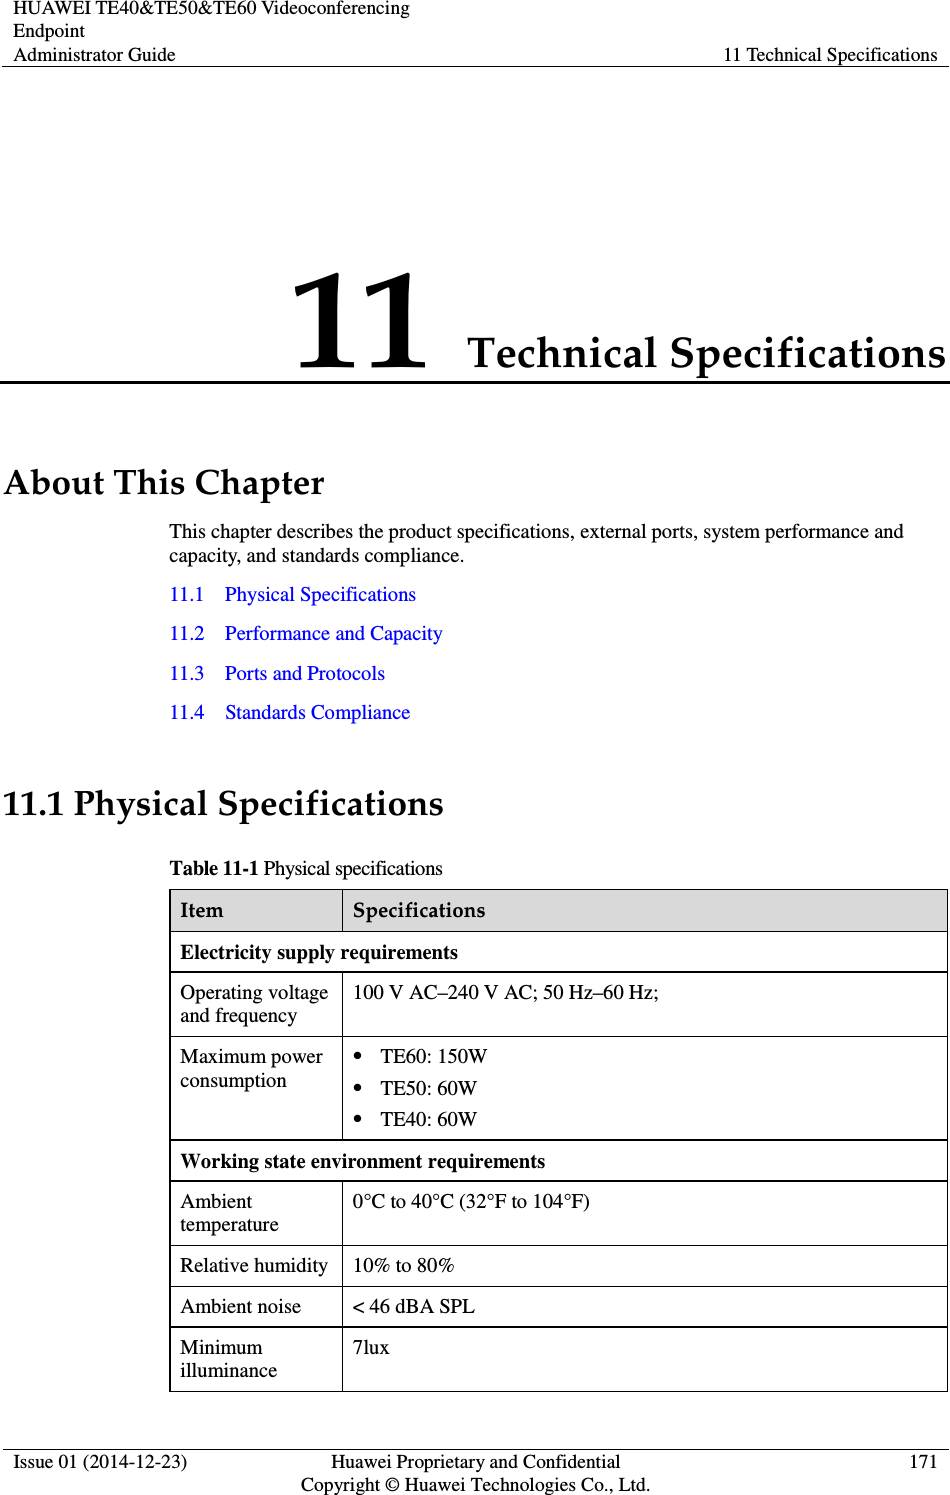 HUAWEI TE40&amp;TE50&amp;TE60 Videoconferencing Endpoint Administrator Guide  11 Technical Specifications  Issue 01 (2014-12-23)  Huawei Proprietary and Confidential                                     Copyright © Huawei Technologies Co., Ltd. 171  11 Technical Specifications About This Chapter This chapter describes the product specifications, external ports, system performance and capacity, and standards compliance. 11.1    Physical Specifications 11.2    Performance and Capacity 11.3    Ports and Protocols 11.4    Standards Compliance 11.1 Physical Specifications Table 11-1 Physical specifications Item  Specifications Electricity supply requirements Operating voltage and frequency 100 V AC–240 V AC; 50 Hz–60 Hz; Maximum power consumption  TE60: 150W  TE50: 60W  TE40: 60W Working state environment requirements Ambient temperature 0°C to 40°C (32°F to 104°F) Relative humidity  10% to 80% Ambient noise  &lt; 46 dBA SPL Minimum illuminance 7lux 